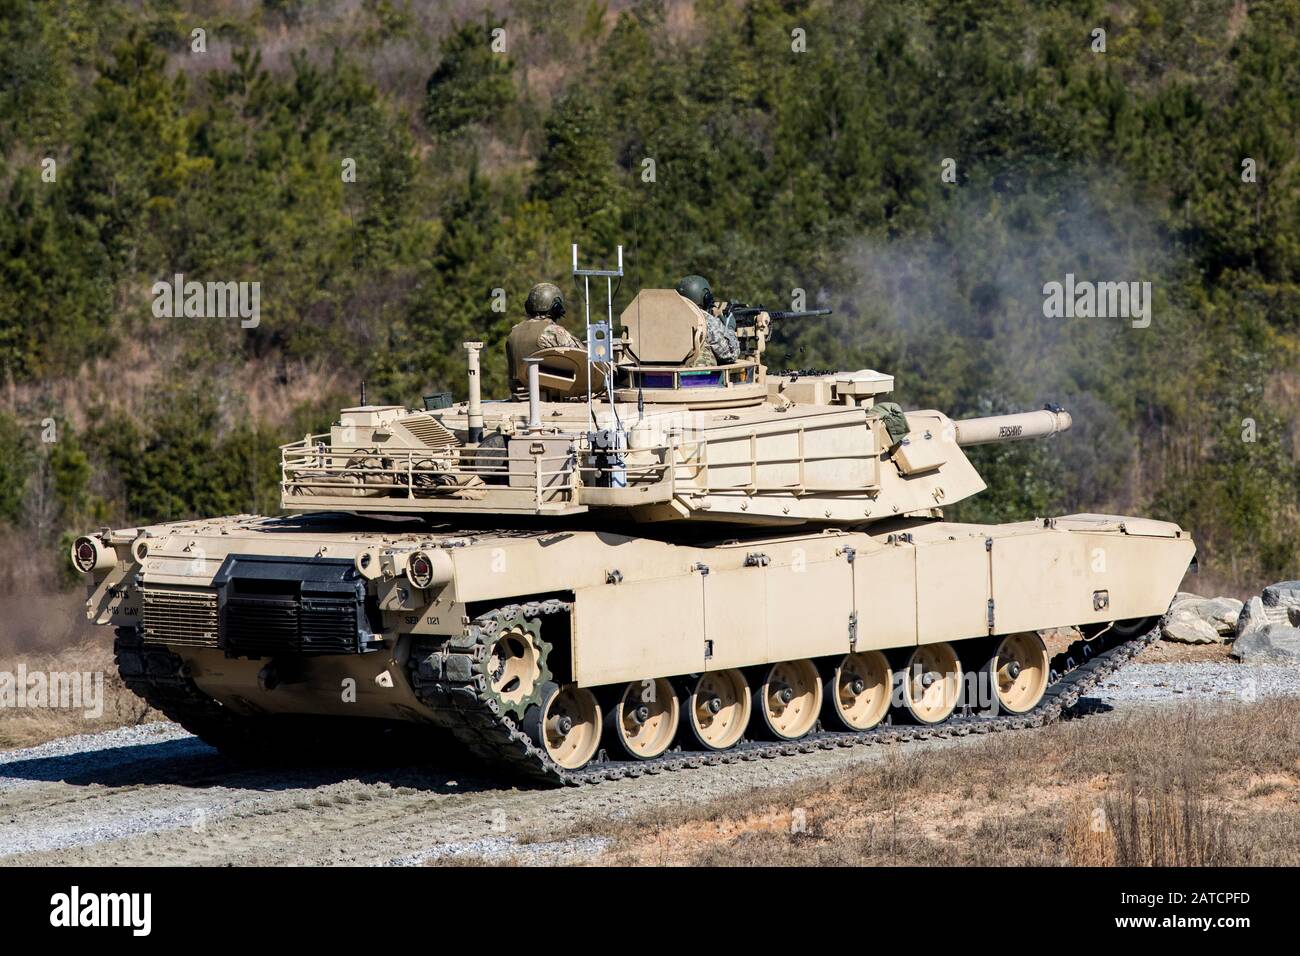 A U.S. Army M1A2 Abrams Tank, with 2nd Squadron, 16th Calvary Regiment, conducts range training during Armor Basic Leaders Course at Ft. Benning, GA on Jan. 30, 2020. Armor Basic Leaders Course, led by 2nd Squadron, 16th Calvary Regiment, trains and develops Tank Platoon Leaders who are competent leaders of character capable to lead, fight, and win in the multi-domain environment while increasing Soldier readiness and strengthing Family and community bonds. (U.S. Army Reserve Photo by Staff Sgt. Joshua Wooten) Stock Photo